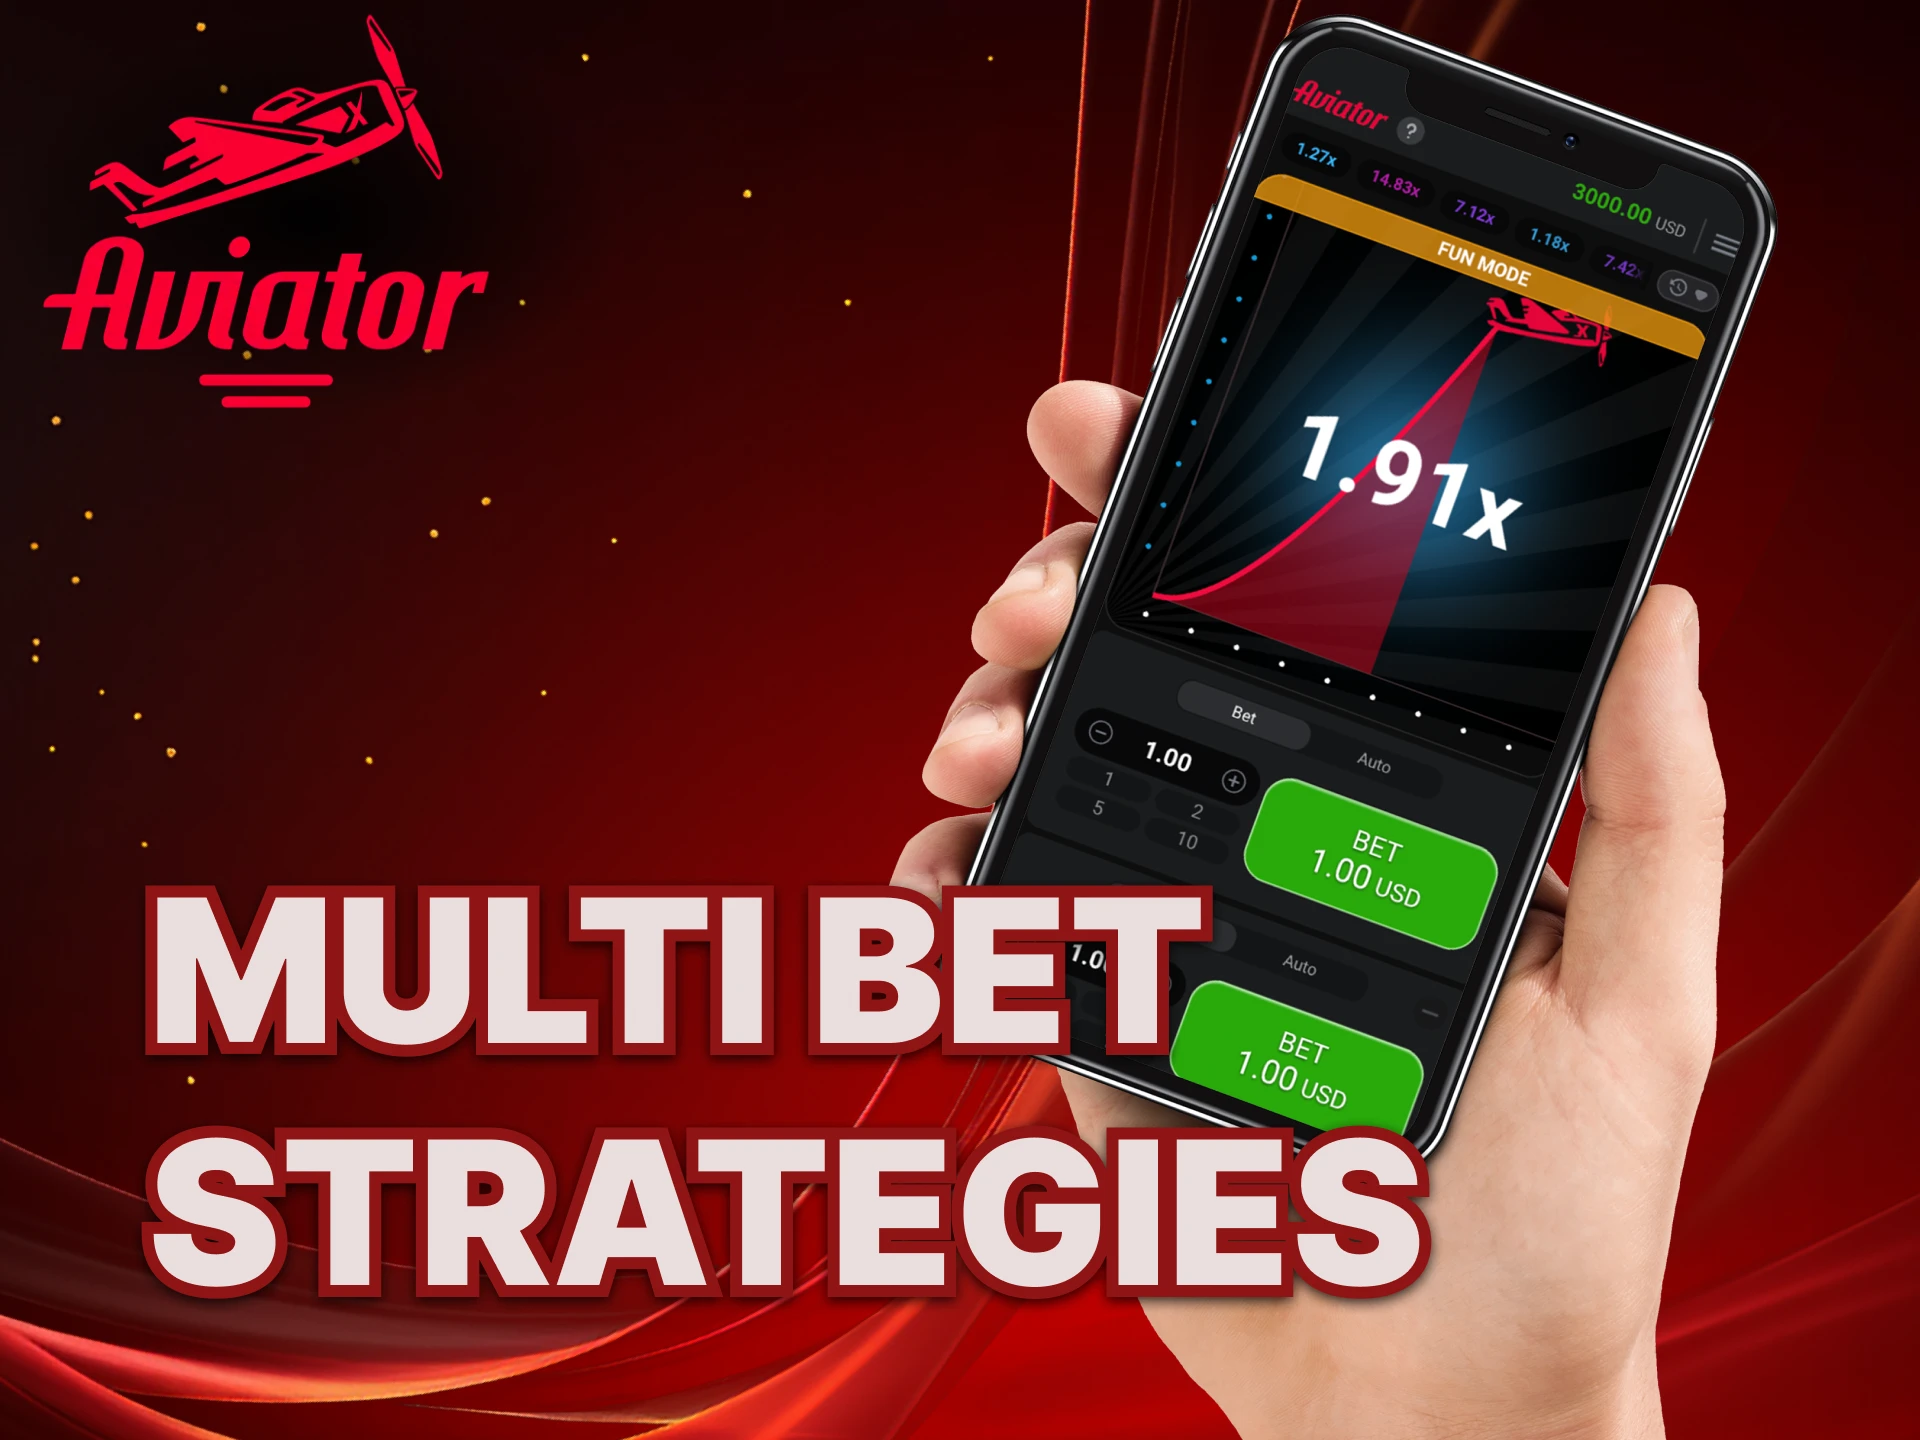 What is Multi Bet Strategies for the game Aviator